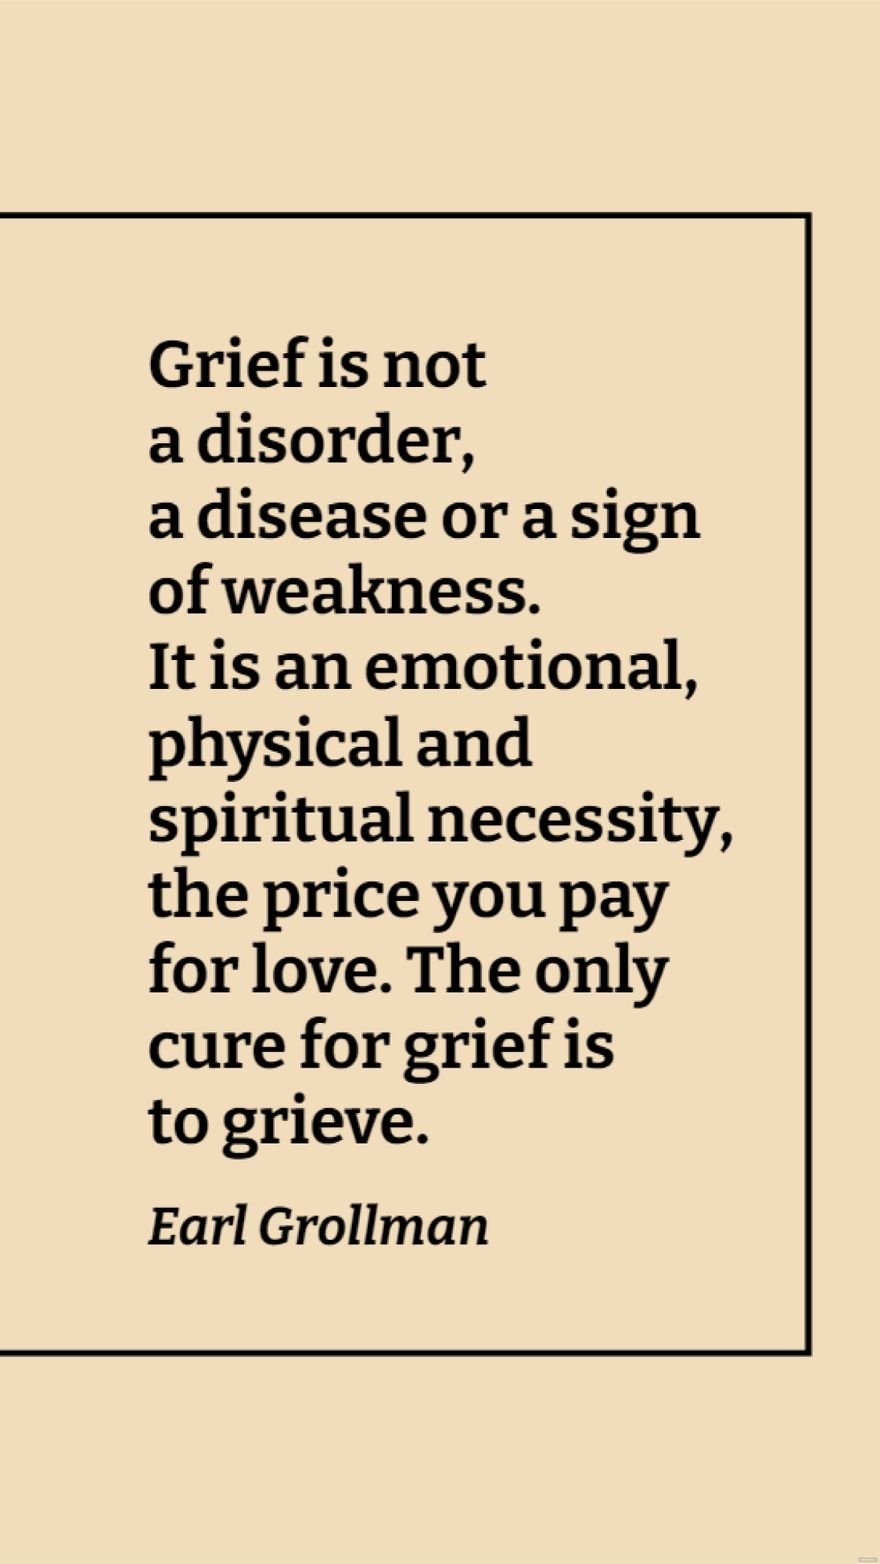 Earl Grollman - Grief is not a disorder, a disease or a sign of weakness. It is an emotional, physical and spiritual necessity, the price you pay for love. The only cure for grief is to grieve.